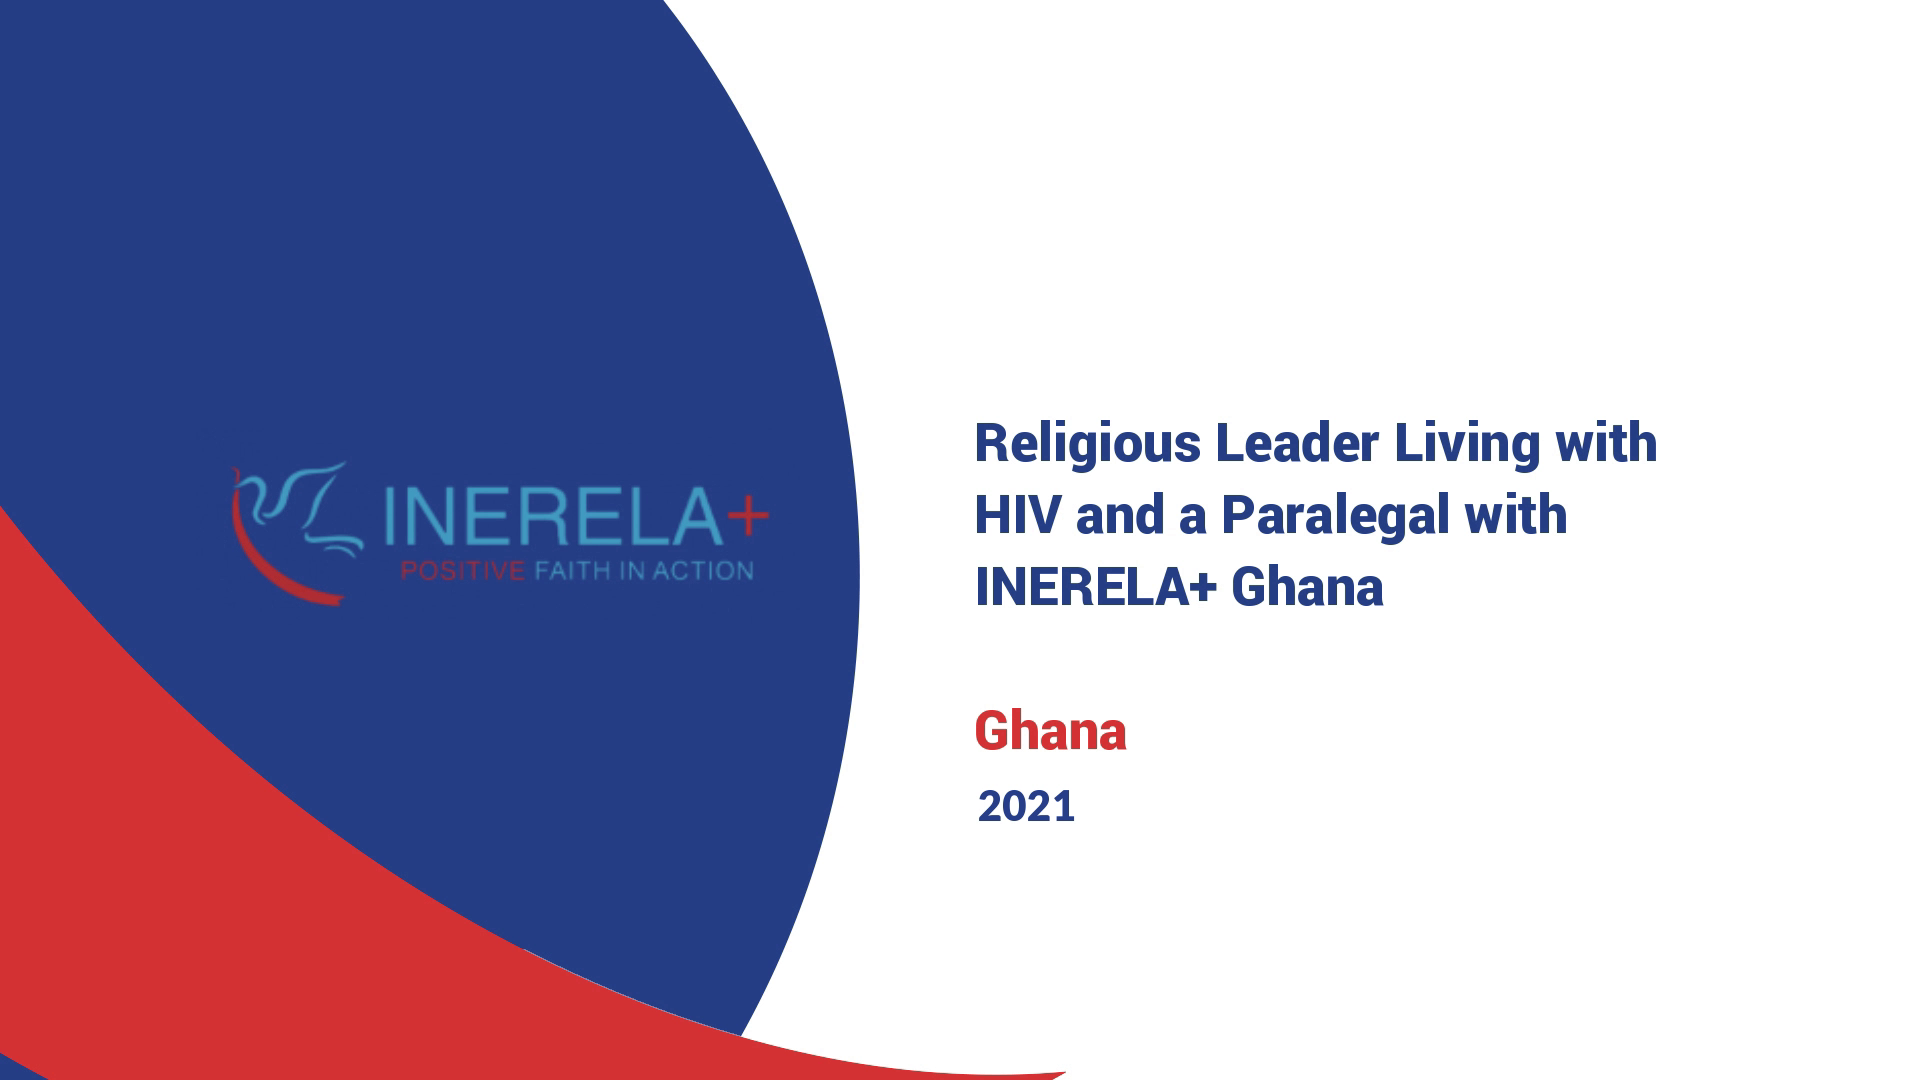 Religious Leader Living with HIV and a Paralegal with INERELA+ Ghana.